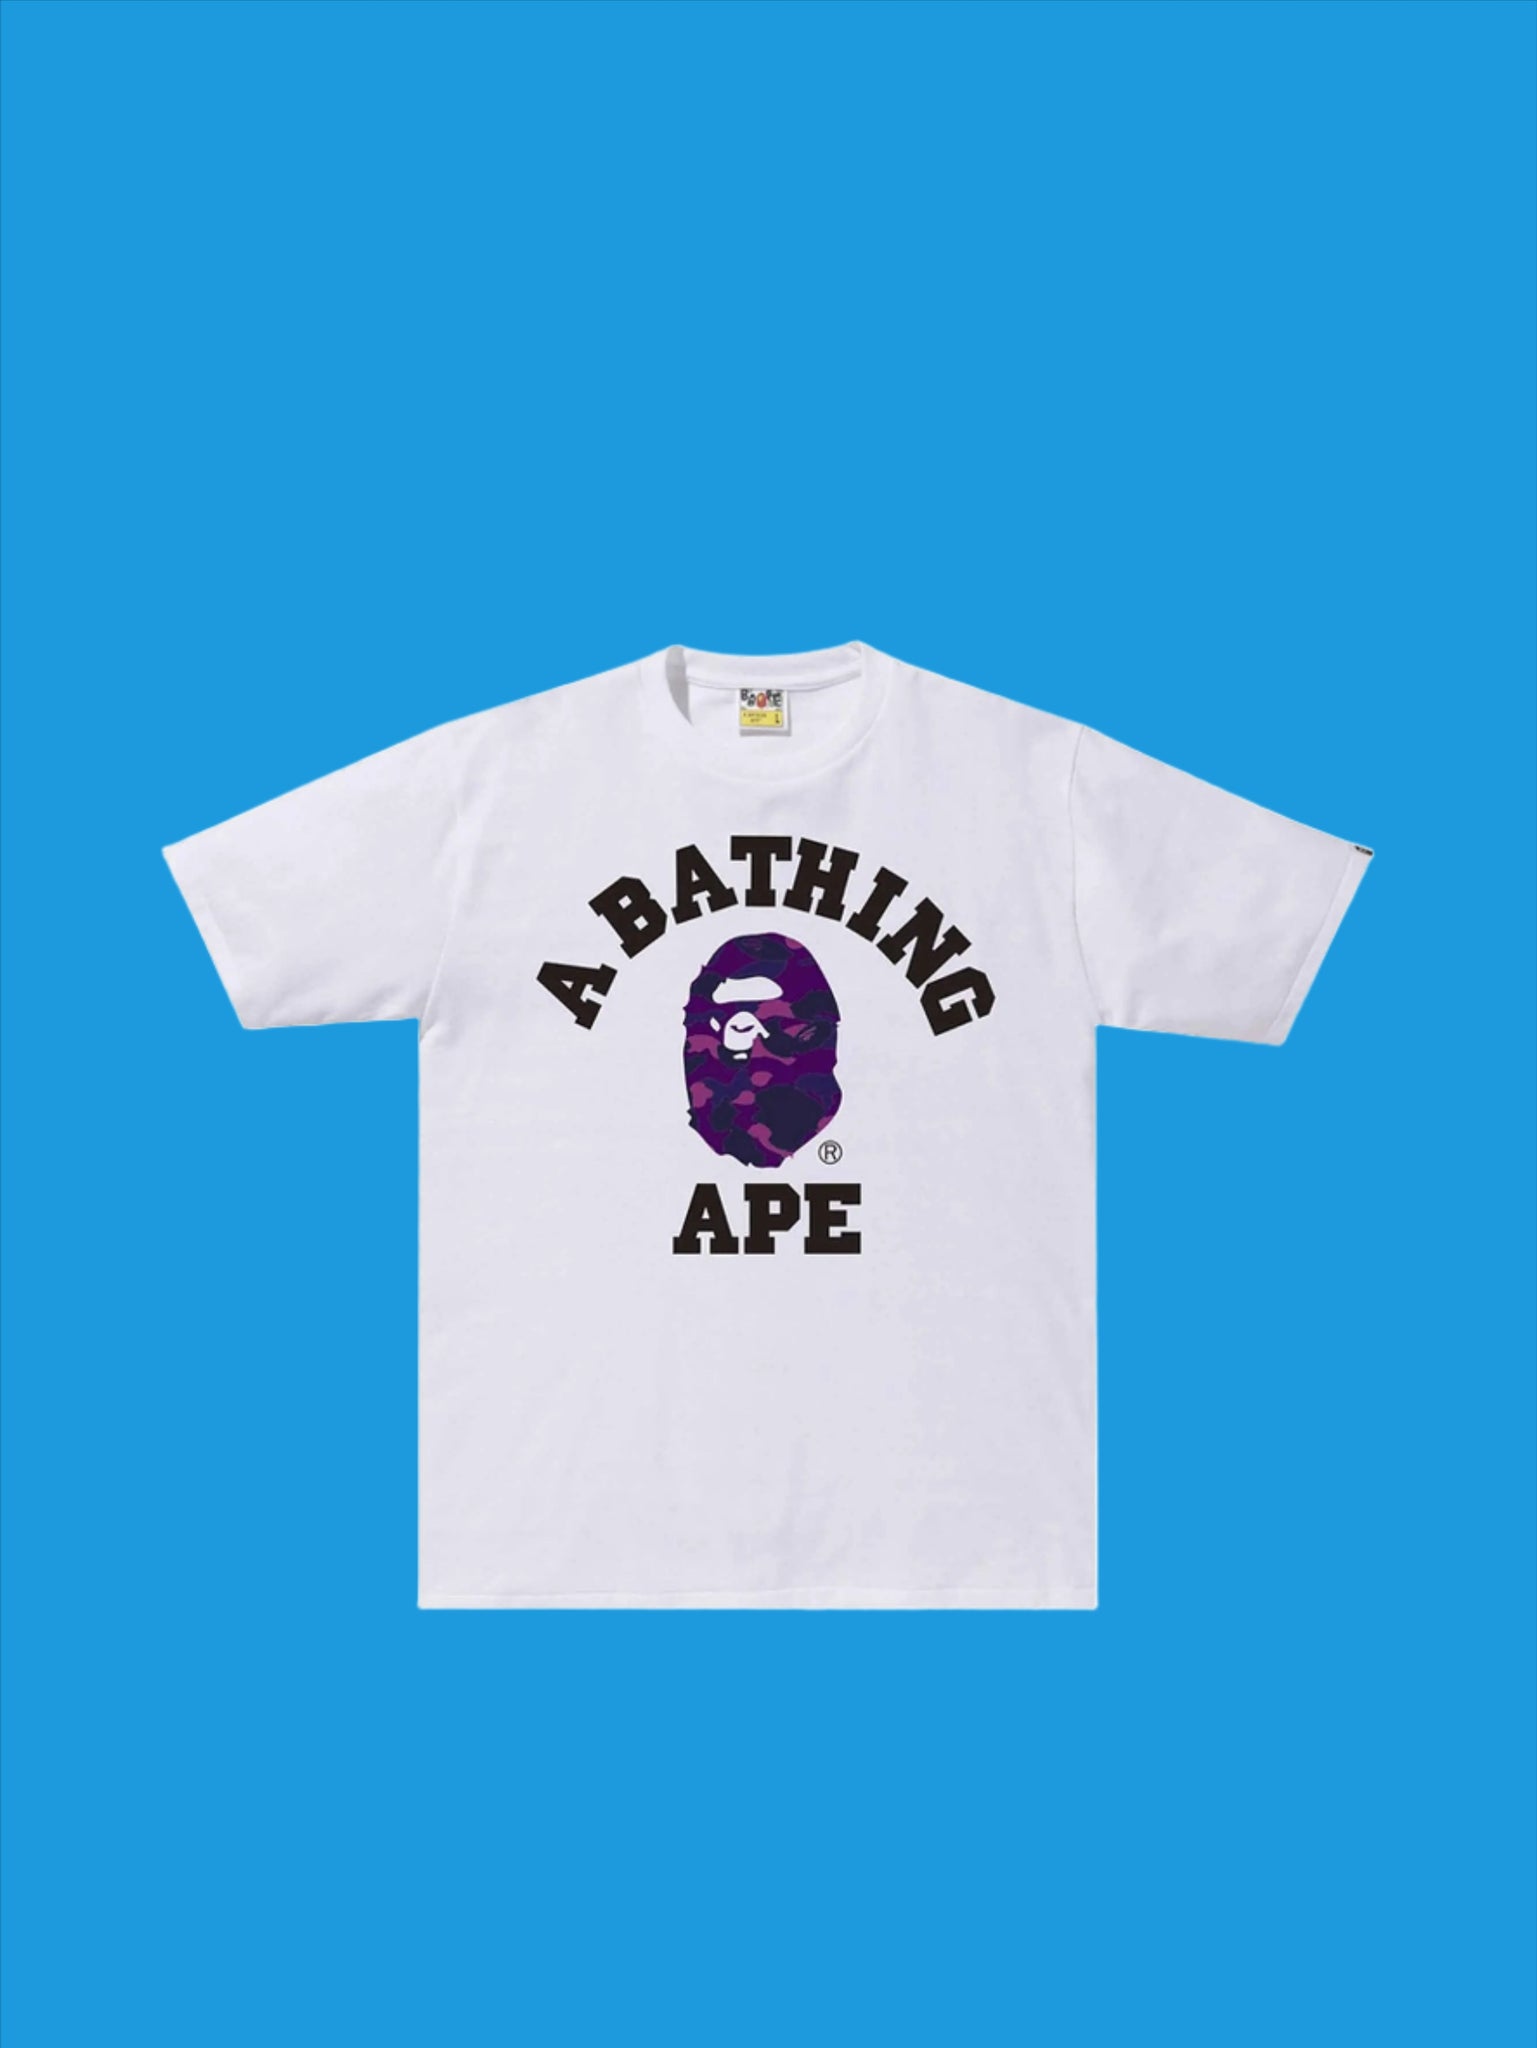 A Bathing Ape Color Camo College Tee White/Purple in Auckland, New Zealand - Shop name